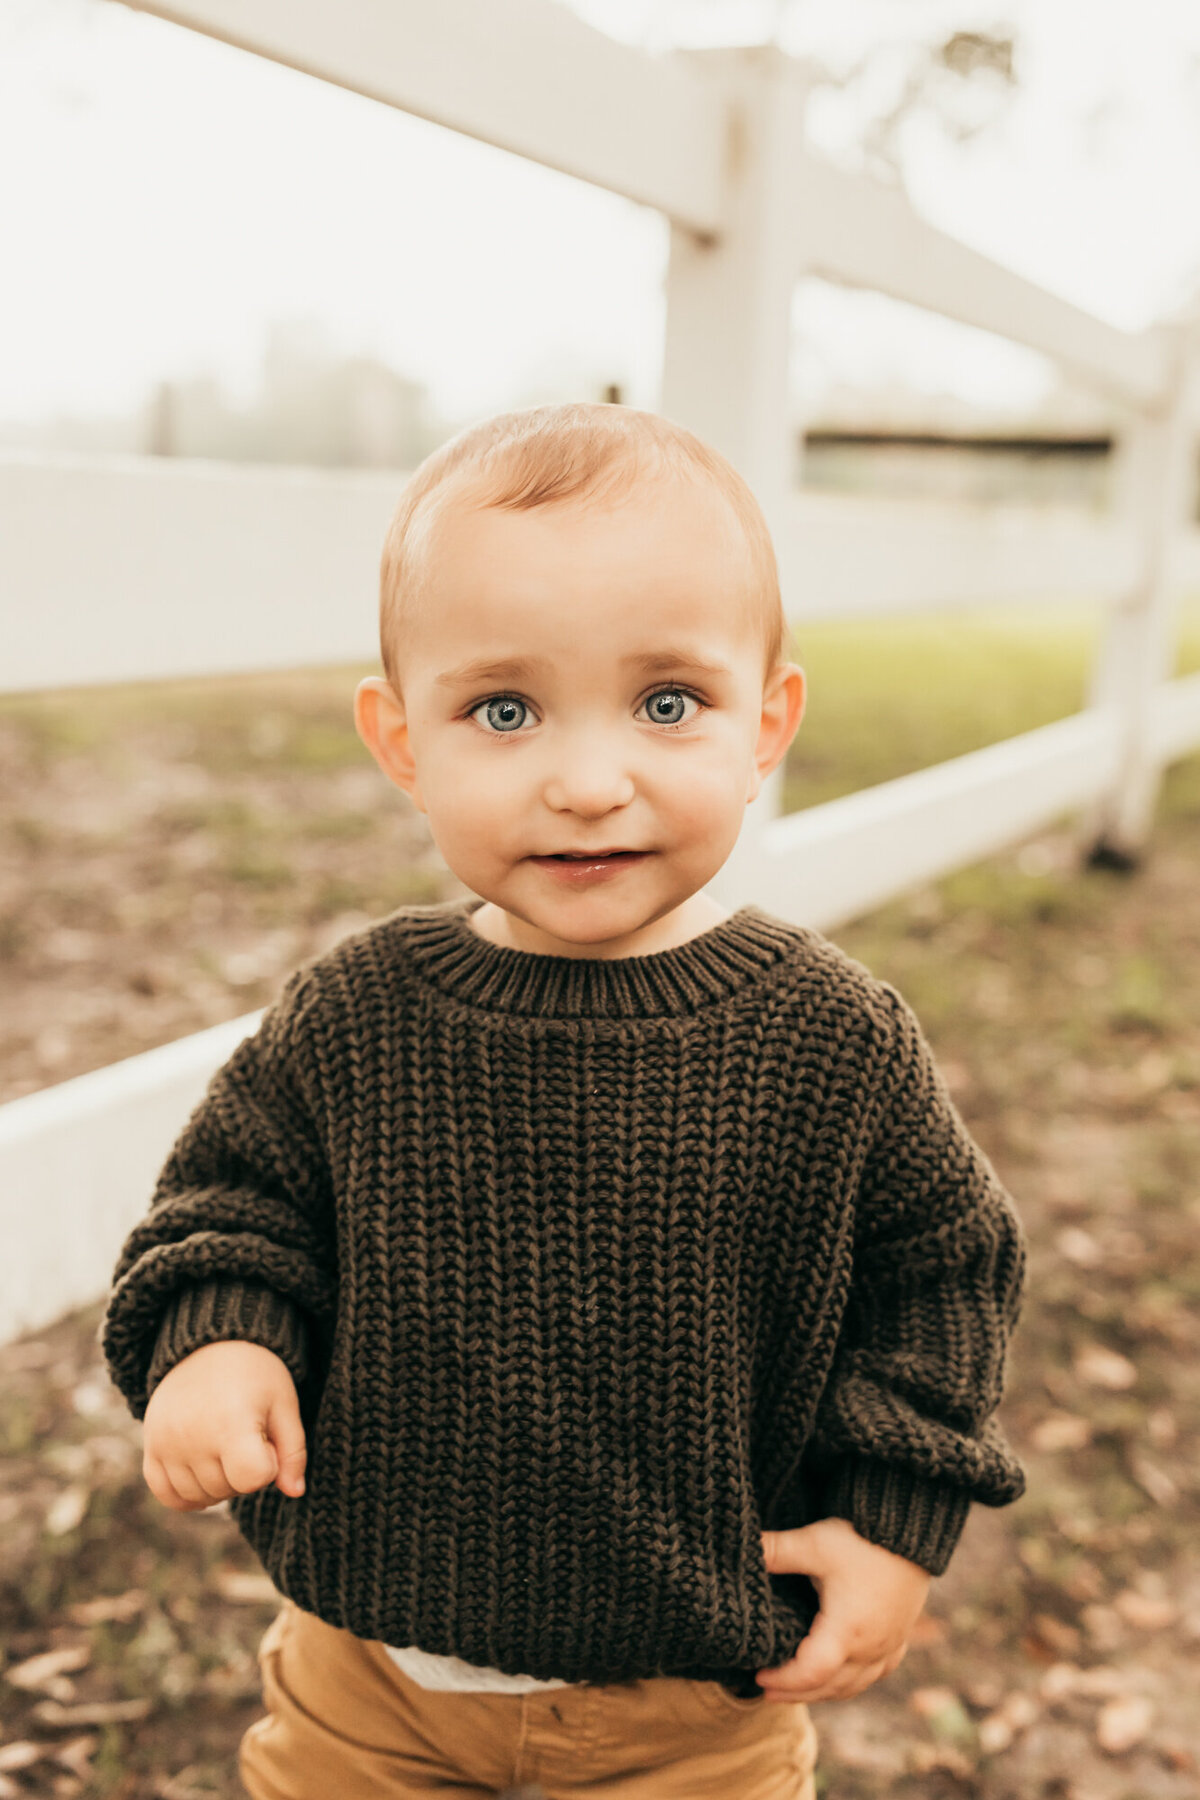 stylish little boy in olive sweater stands against white fence.